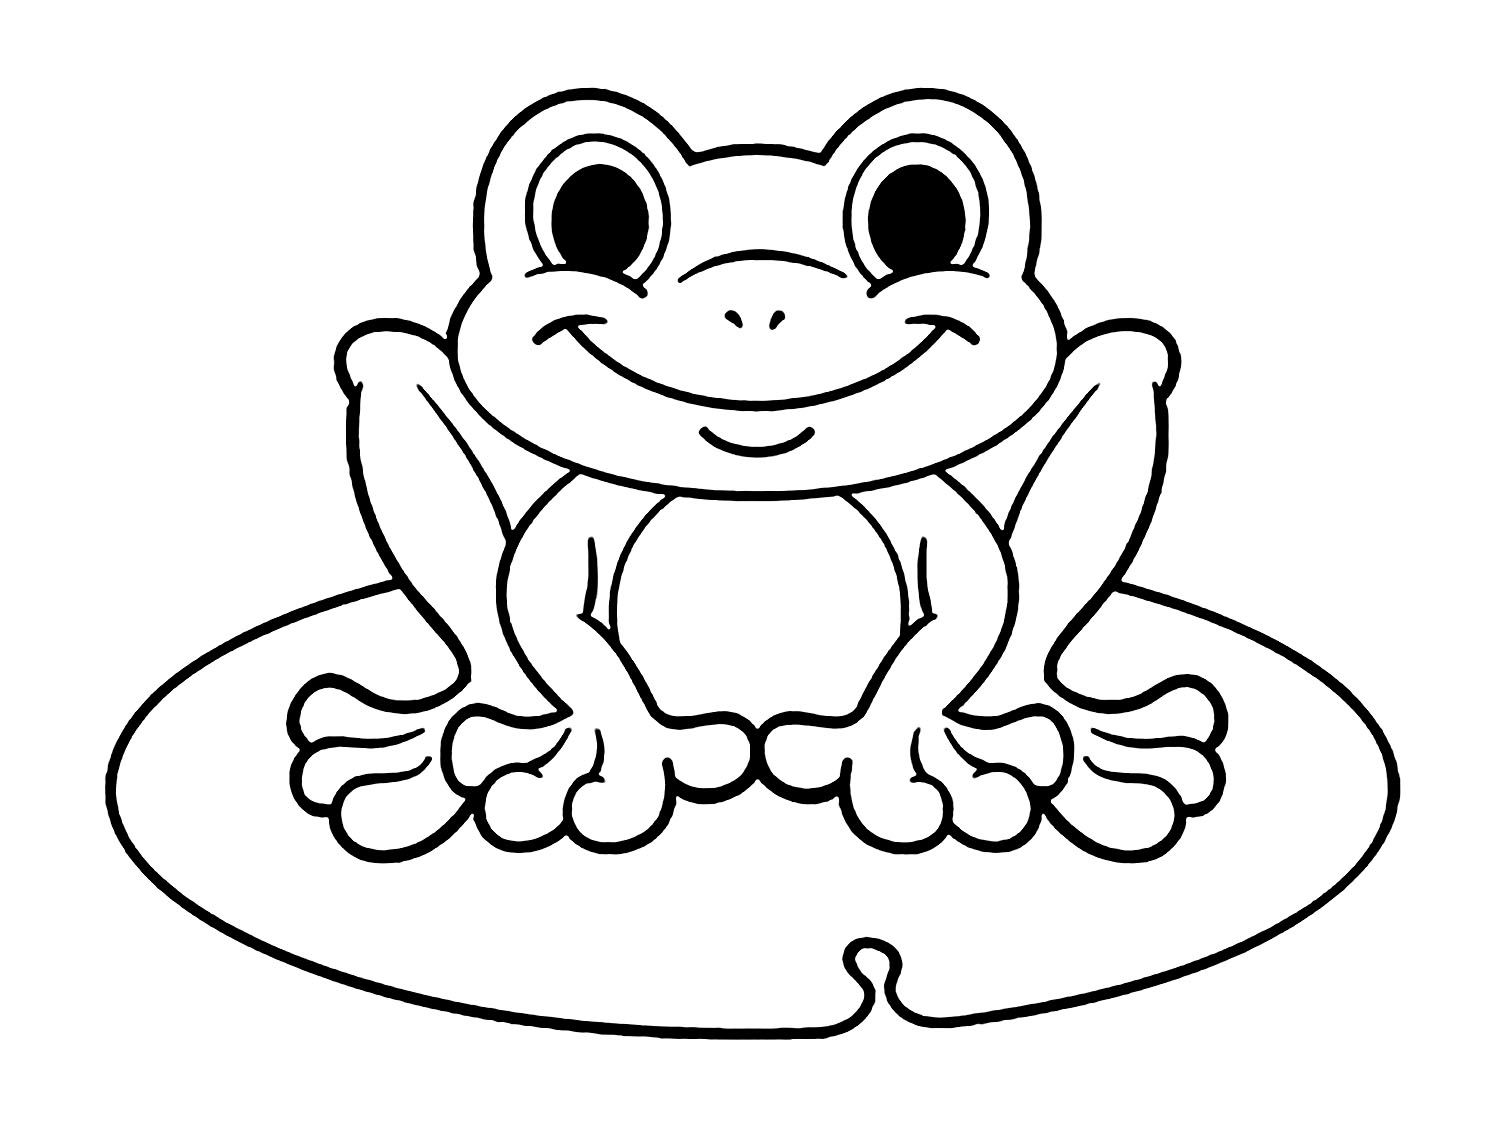 Frog coloring page to print